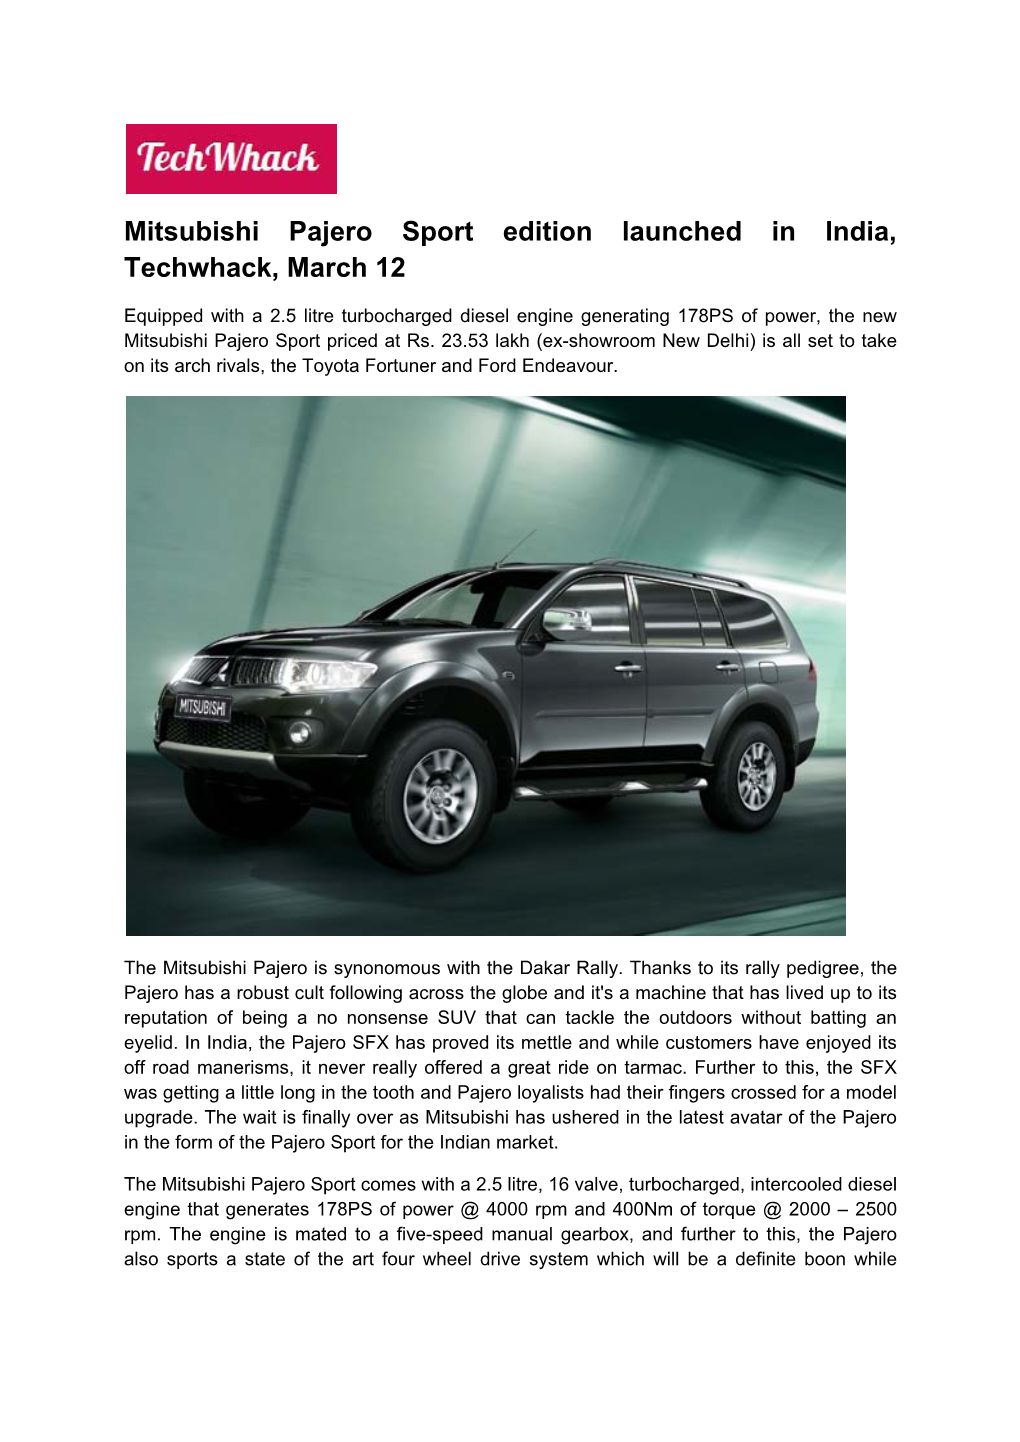 Mitsubishi Pajero Sport Edition Launched in India, Techwhack, March 12